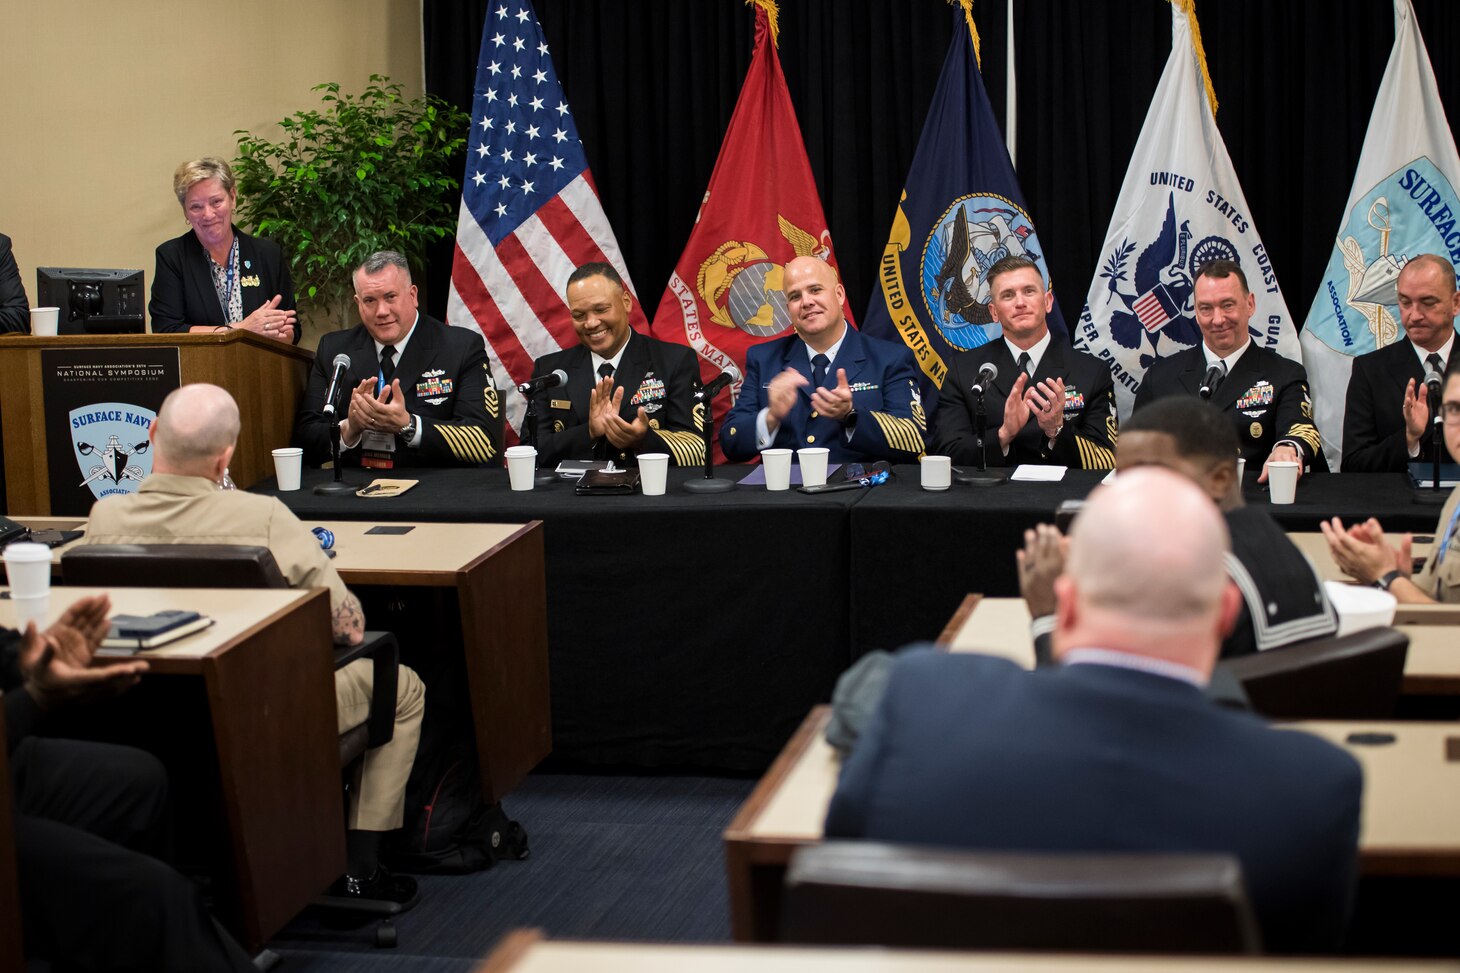 Top enlisted leaders from the U.S. Navy and U.S. Coast Guard take part in an enlisted roundtable at the Surface Navy Association’s 35th National Symposium in Arlington, Va., Jan. 10. The senior leaders answered questions from audience members, in-person and virtual, regarding concerns affecting service members and their families; topics included pay and allowances, childcare support, and access to mental healthcare. The symposium brought together joint experts and decision-makers in the military, industry, and congress to discuss how the Surface Force is a critical element of national defense and security.